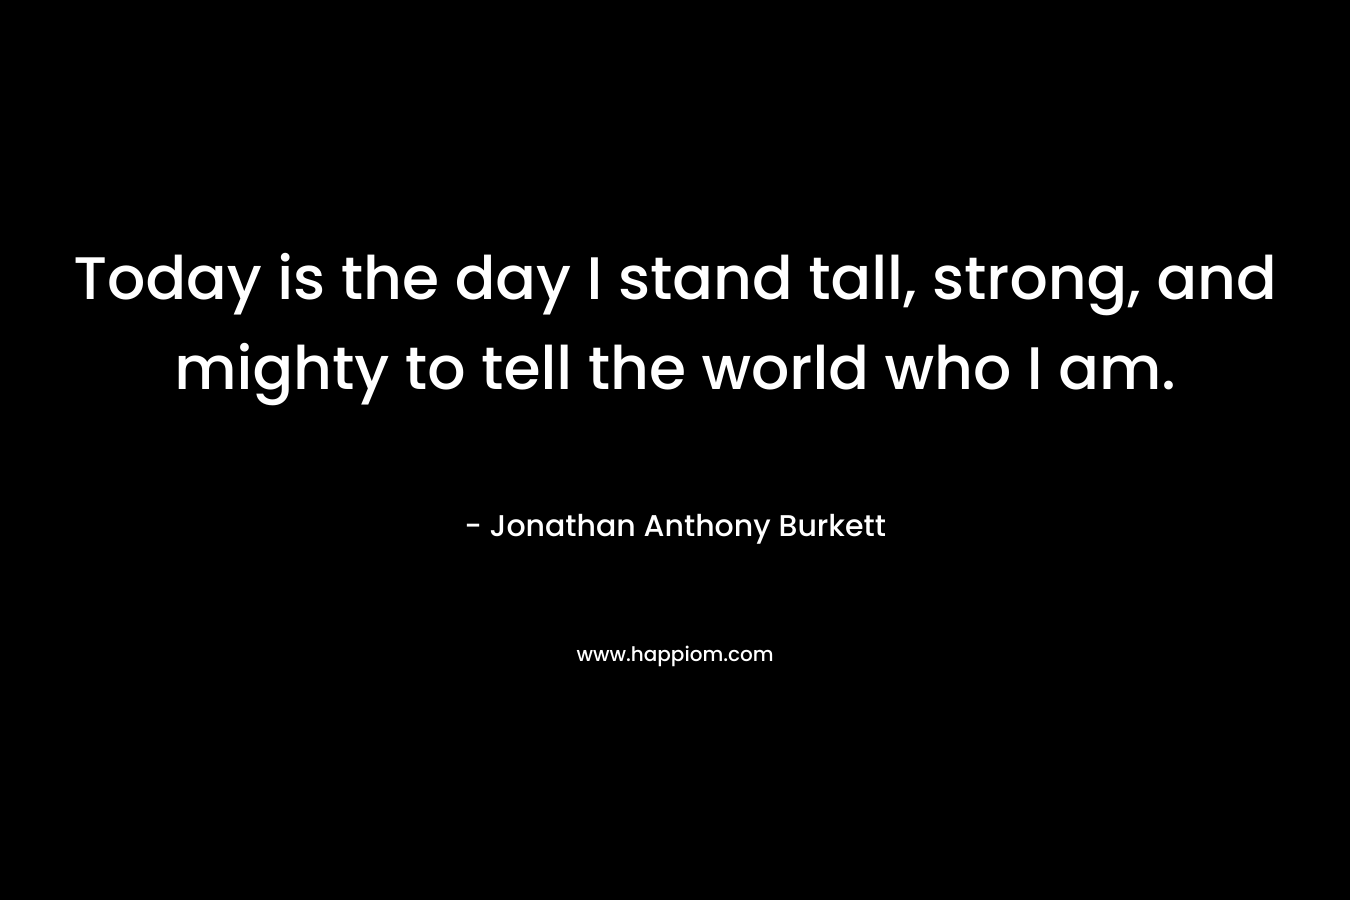 Today is the day I stand tall, strong, and mighty to tell the world who I am. – Jonathan Anthony Burkett